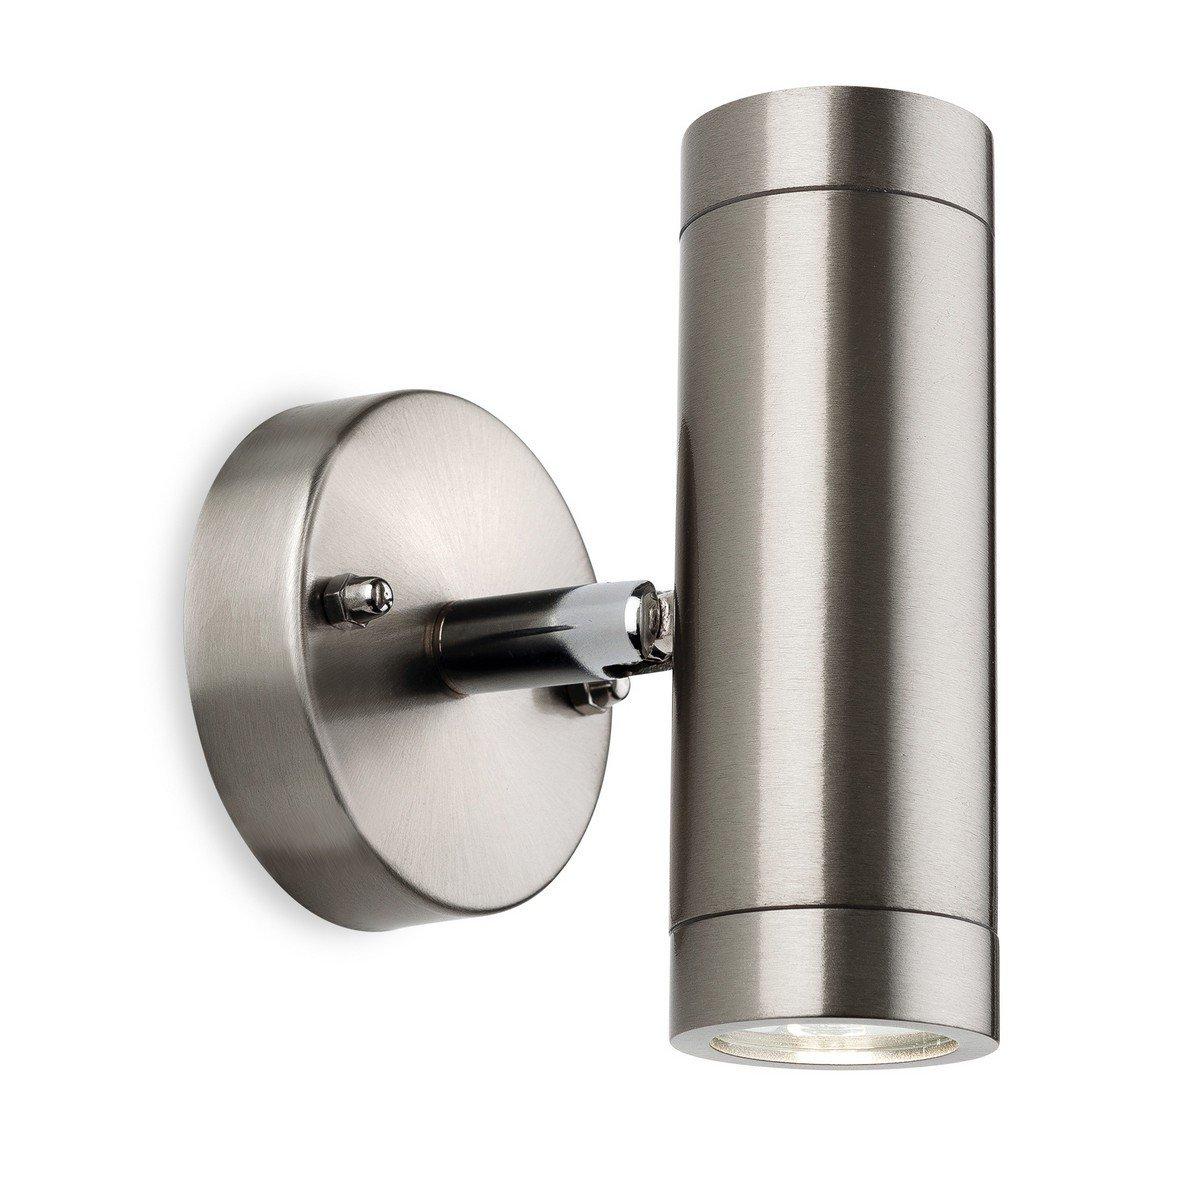 Sprint LED 1 Light Outdoor Wall Light Stainless Steel IP44